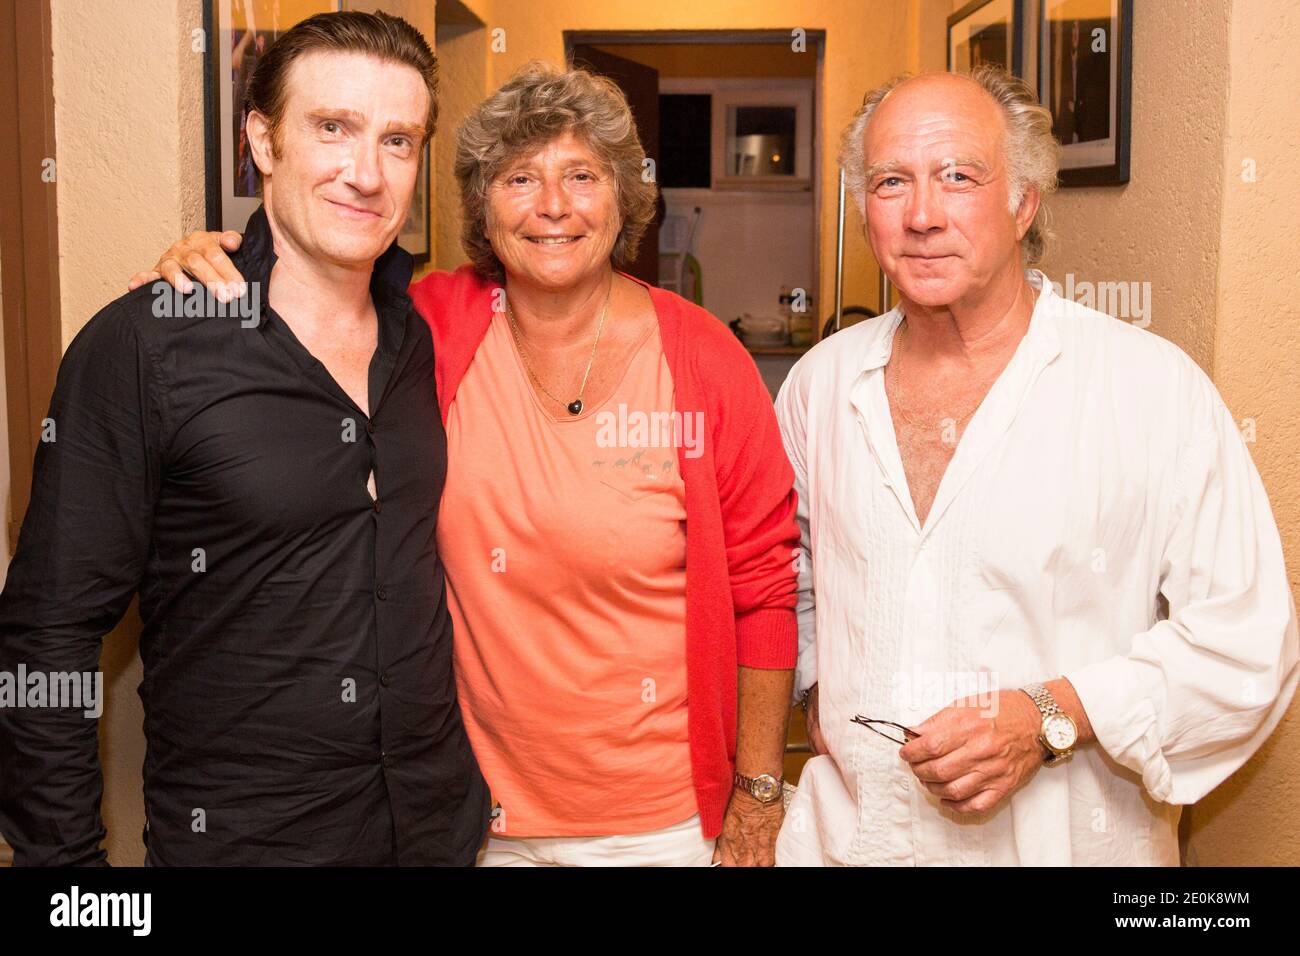 Daniel Colas, Jacqueline Franjou, Thierry Fremont after the presetntation of the play Hollywood directed by Daniel Colas during the Festival de Ramatuelle in Ramatuelle, France on August 3, 2012. Photo by Cyril Bruneau/ABACAPRESS.COM Stock Photo